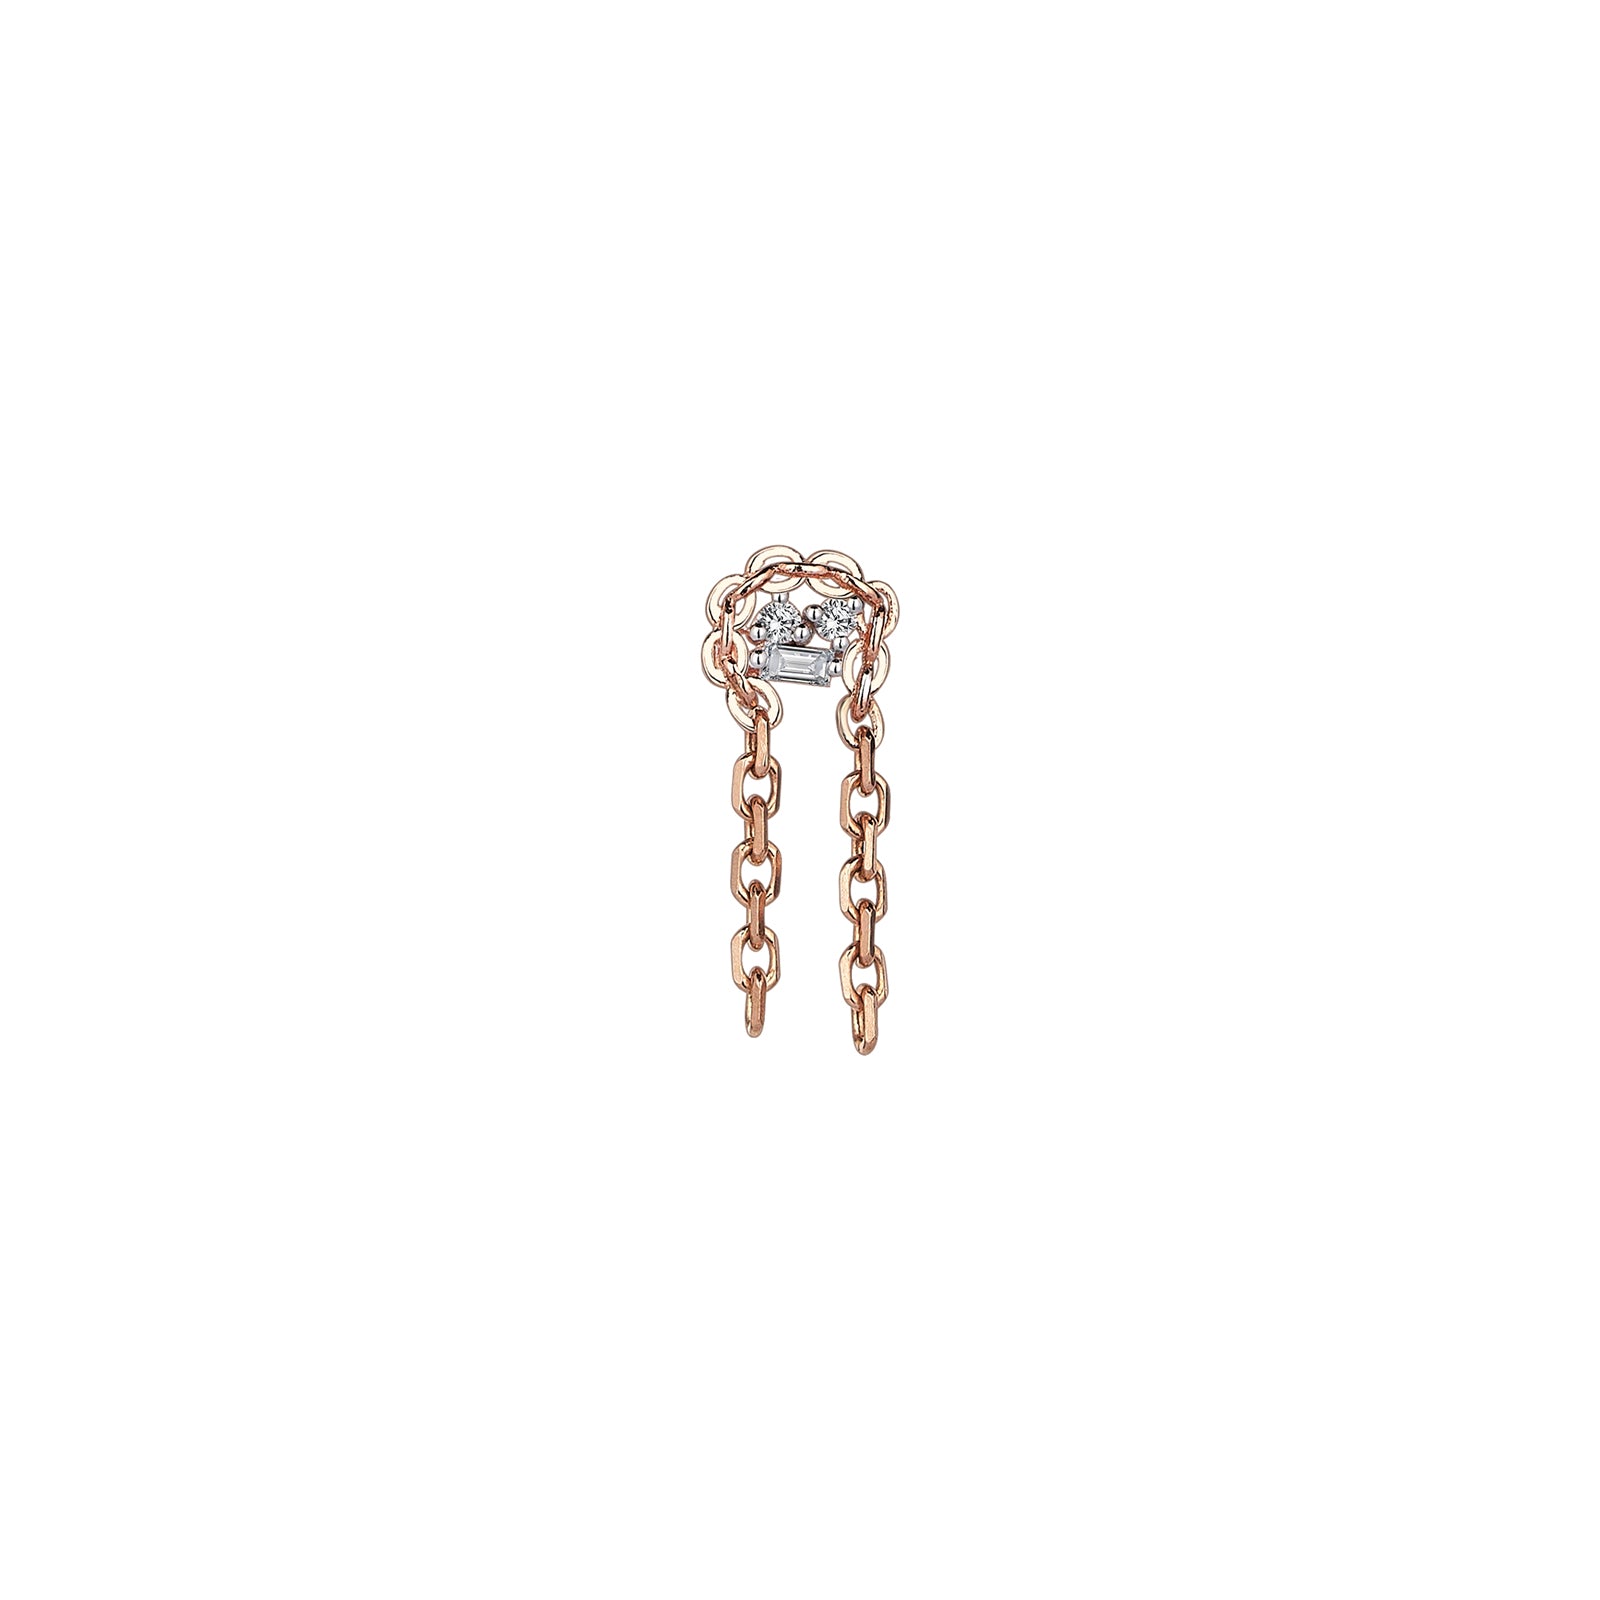 Chained Earring Roslow Gold / White Brilliant Diamond